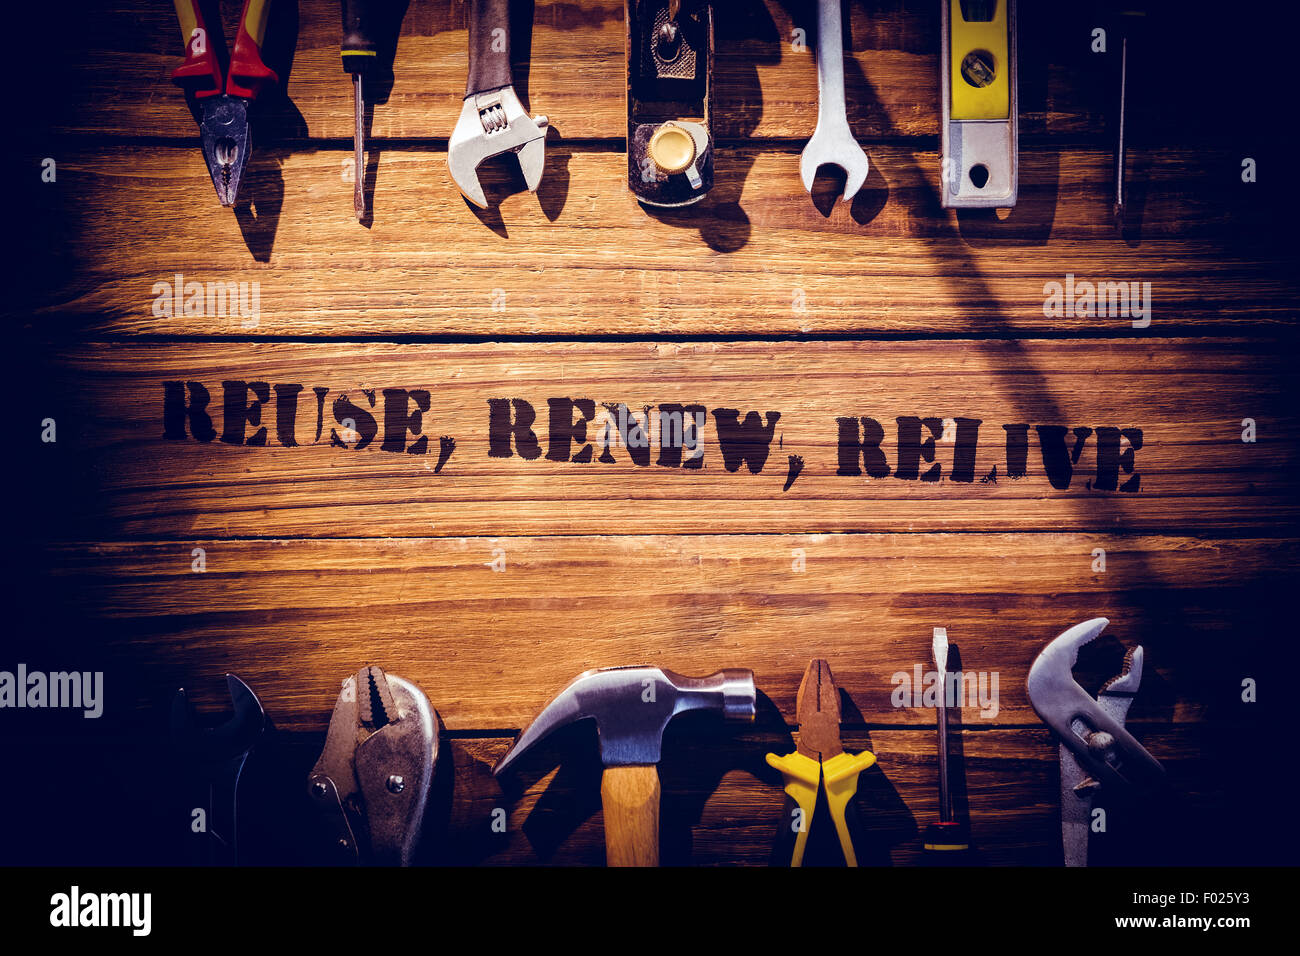 Reuse, renew, relive against desk with tools Stock Photo